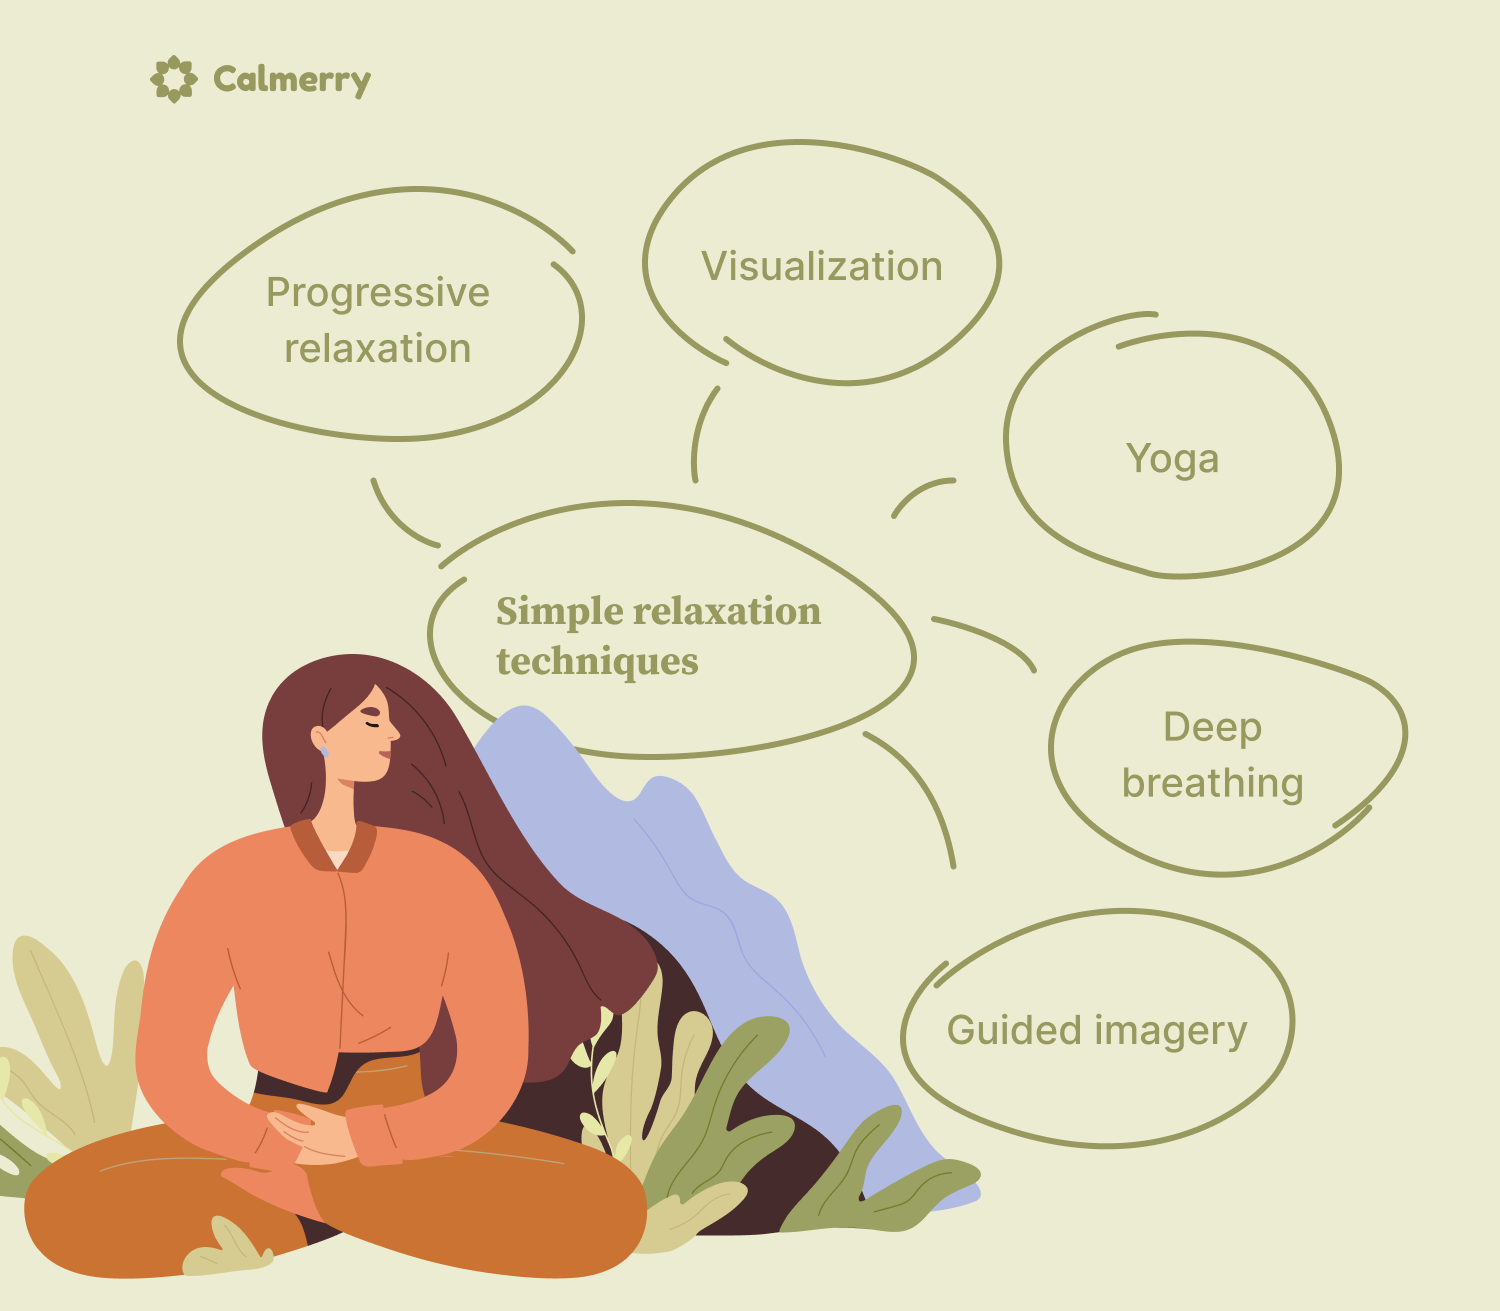 You can choose from among many relaxation techniques